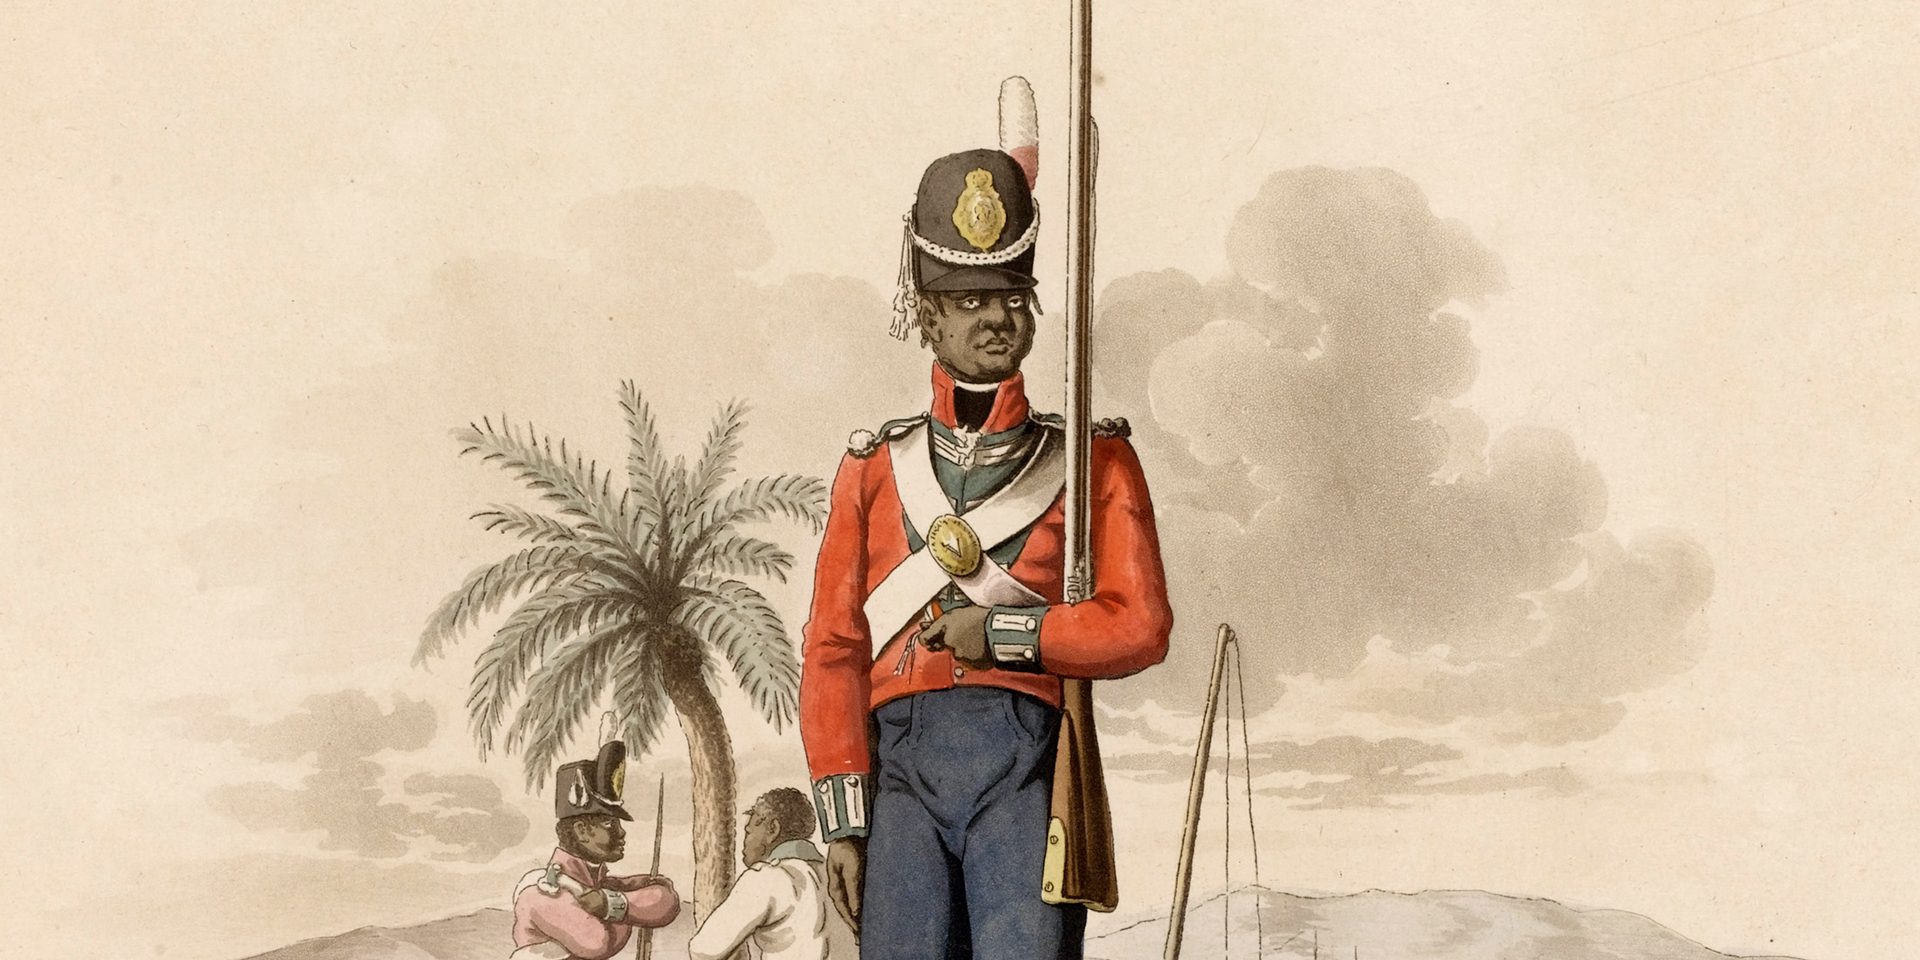 A Private of the 5th West India Regiment, 1812